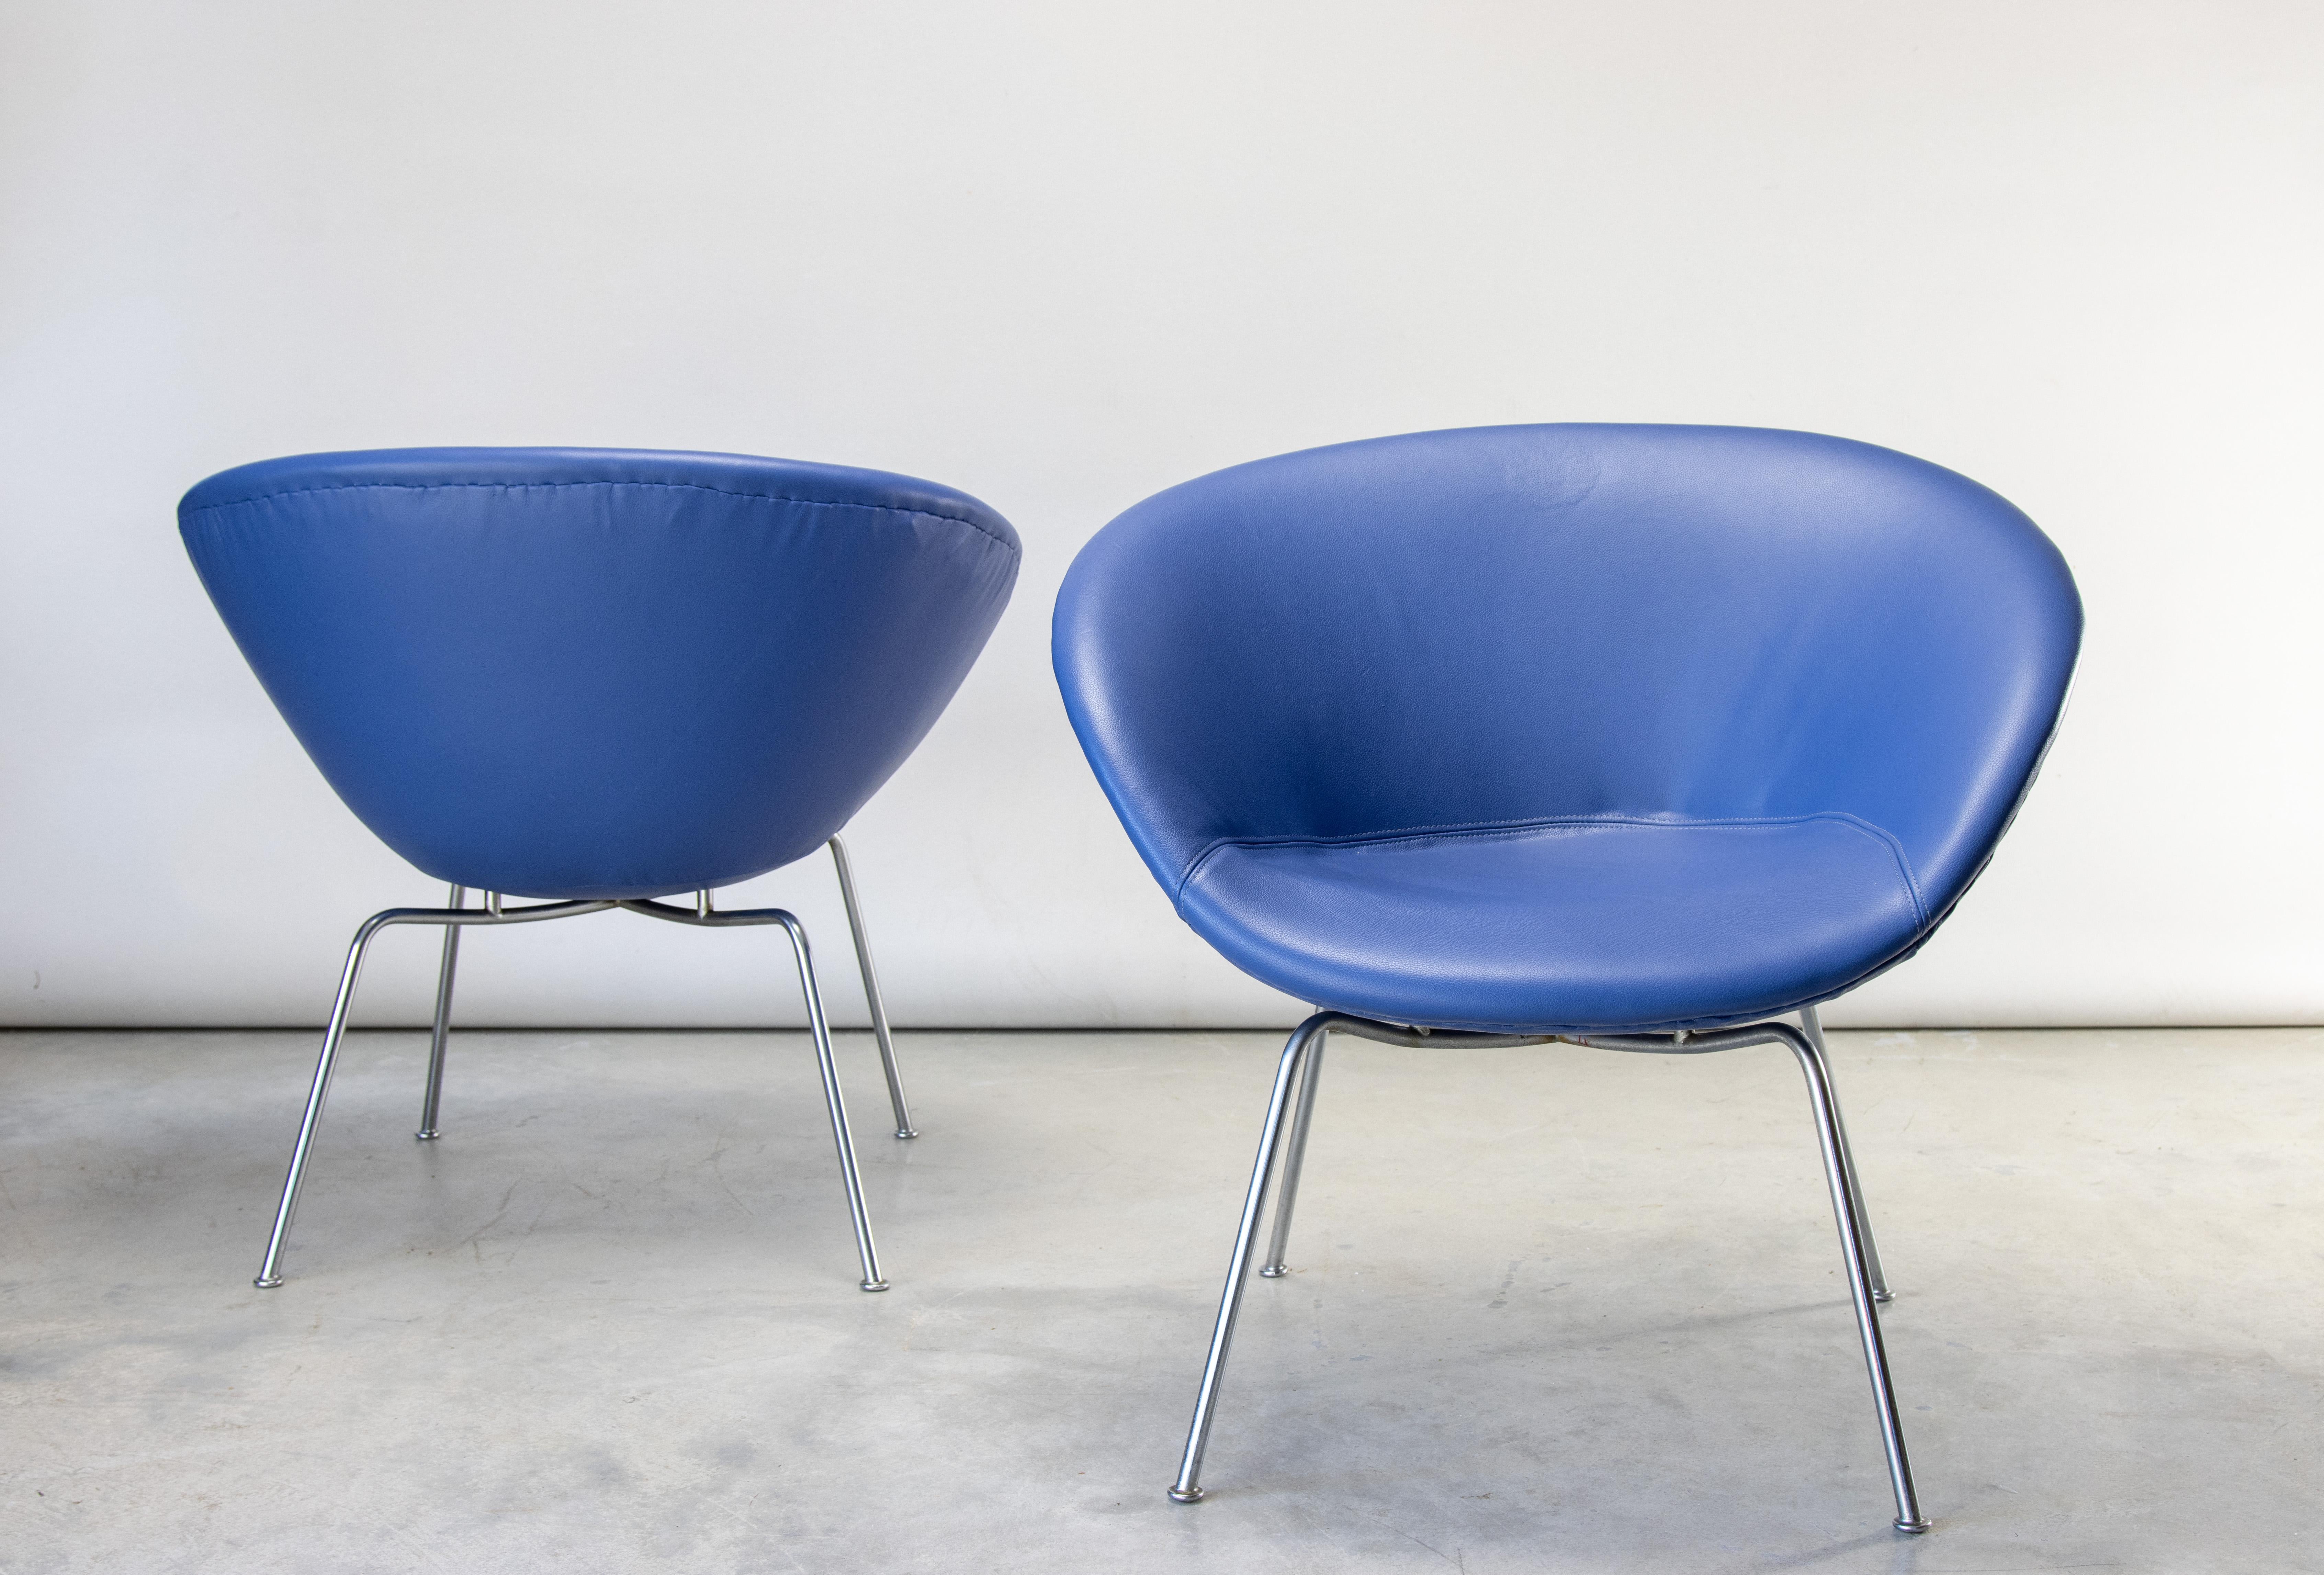 Iconic Pot chairs designed by Arne Jacobsen for Fritz Hansen. these examples are early with the white stamp. The original wool upholstery was replaced with a similar cornflower blue leather. A unique minimalist form that appears to float off of the